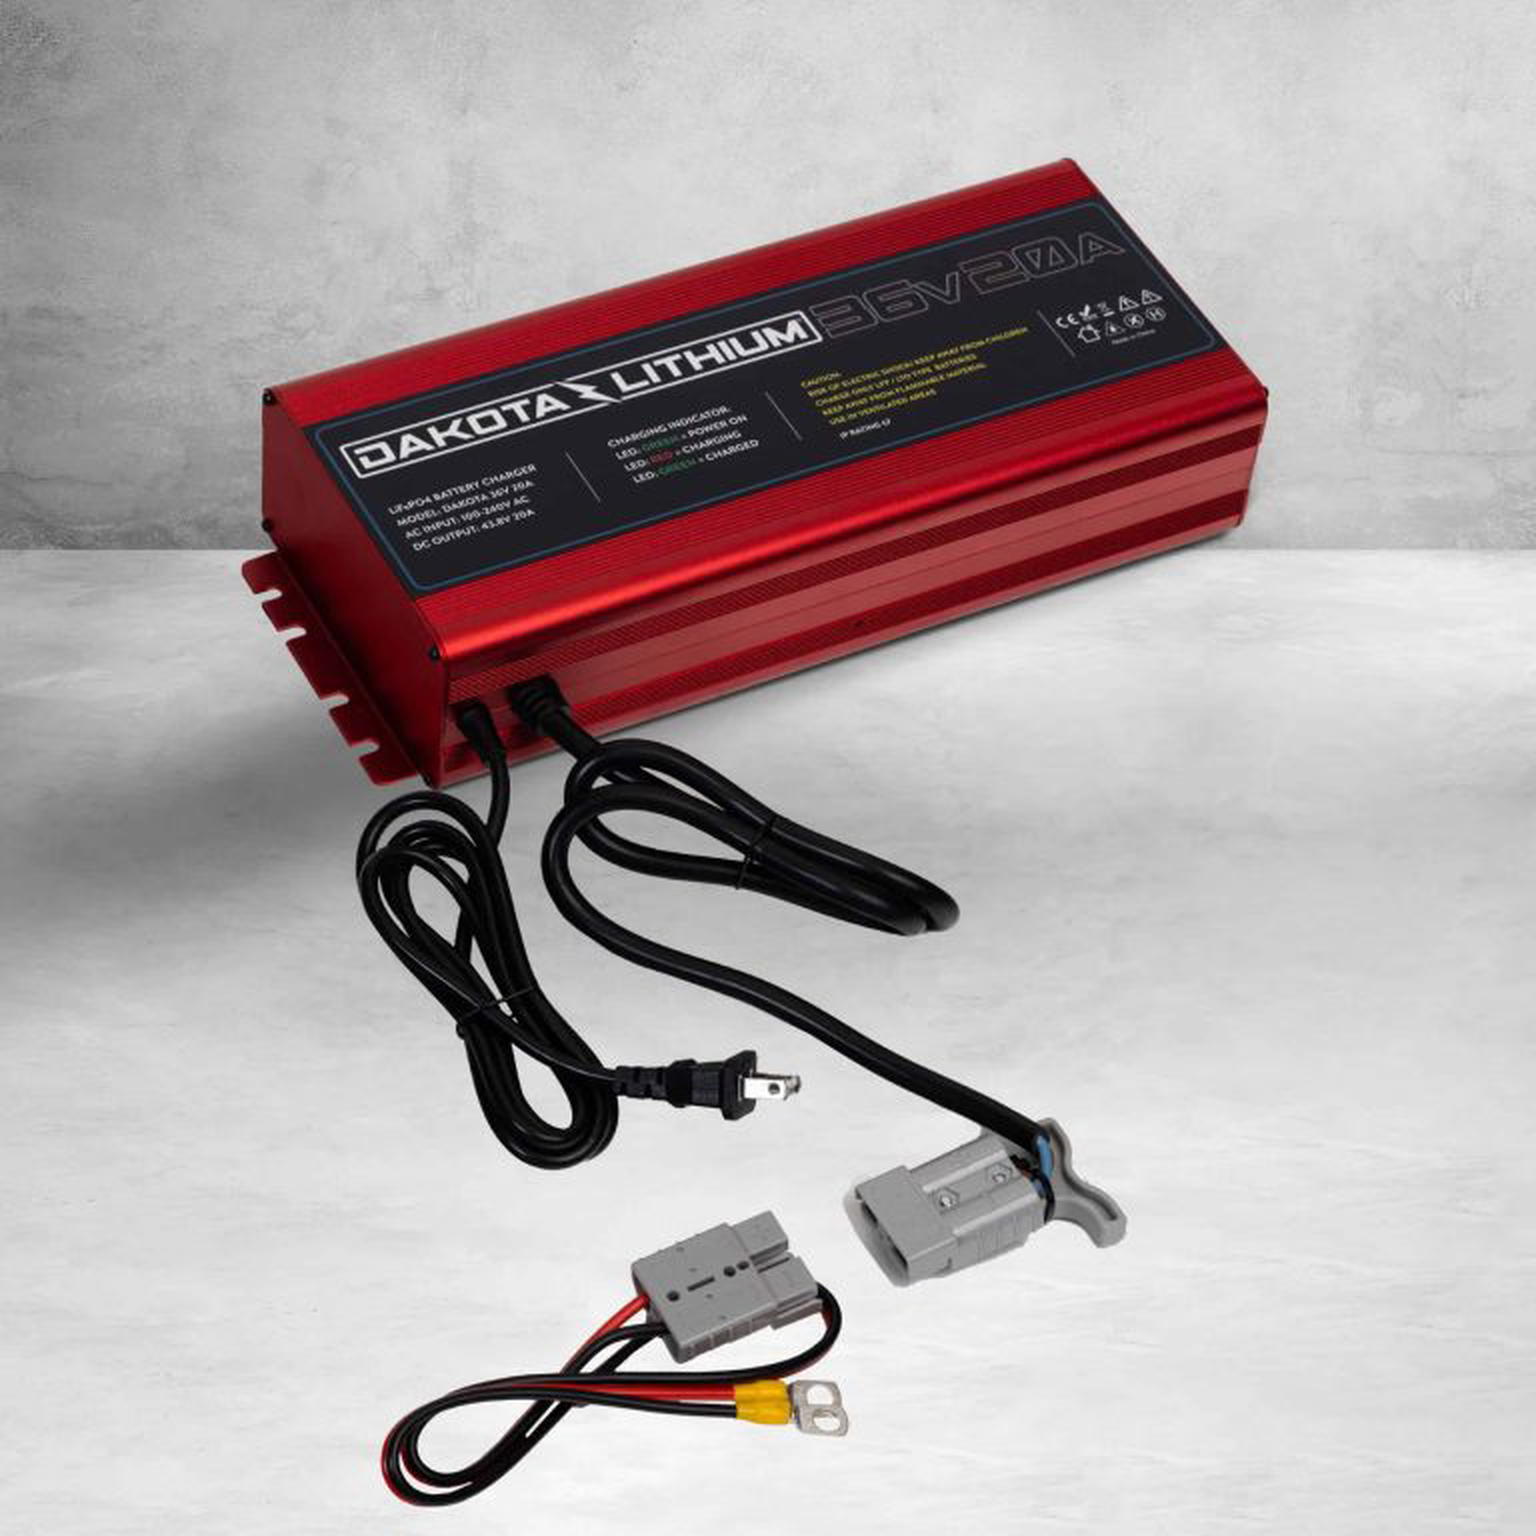 Ultra Fast 36V 20A Waterproof Dakota Lithium LiFePO4 Onboard Battery Charger